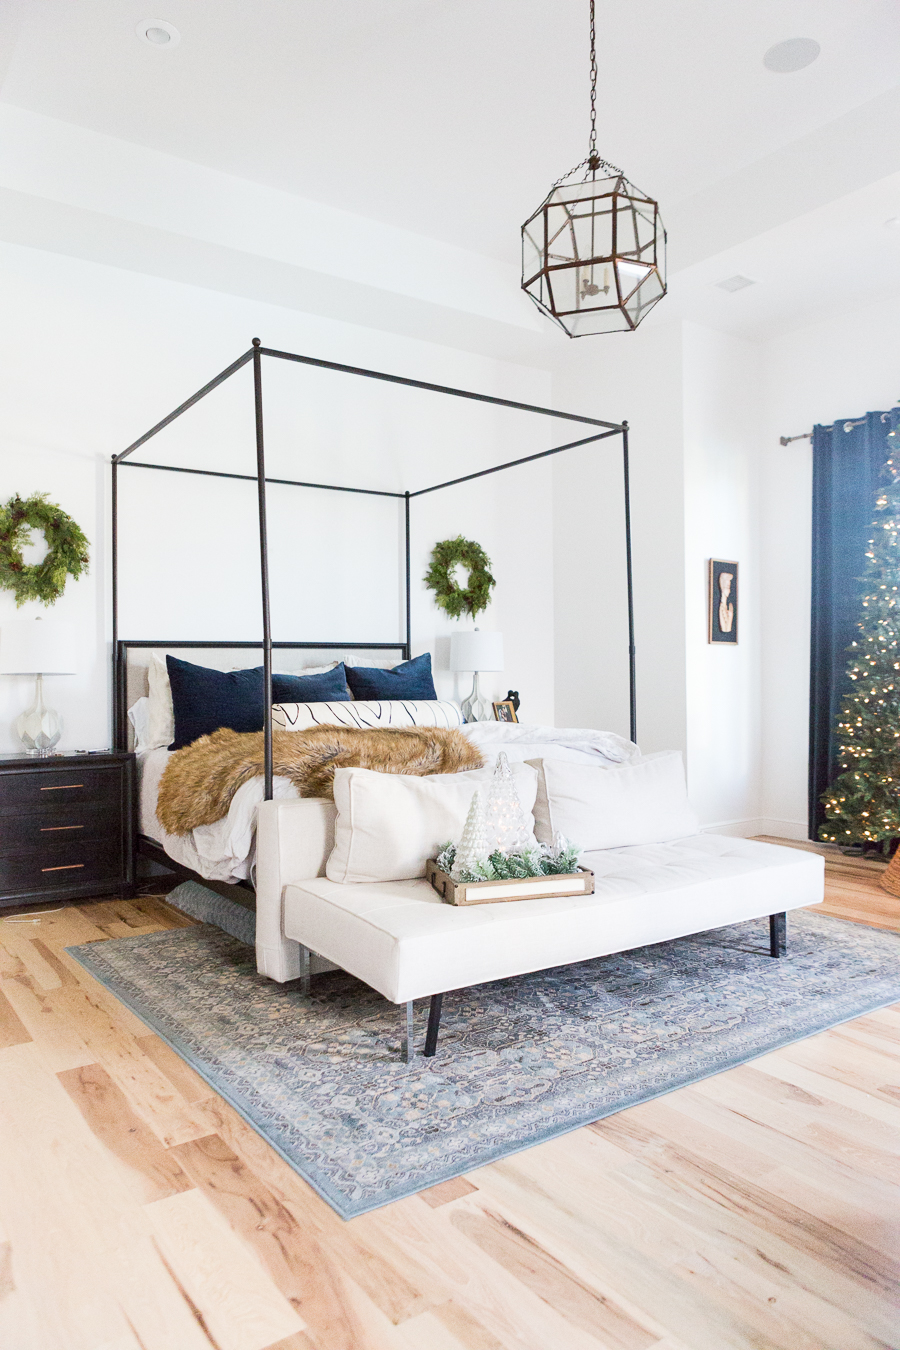 5 Easy Christmas Ideas for Bedrooms | CC and Mike ...